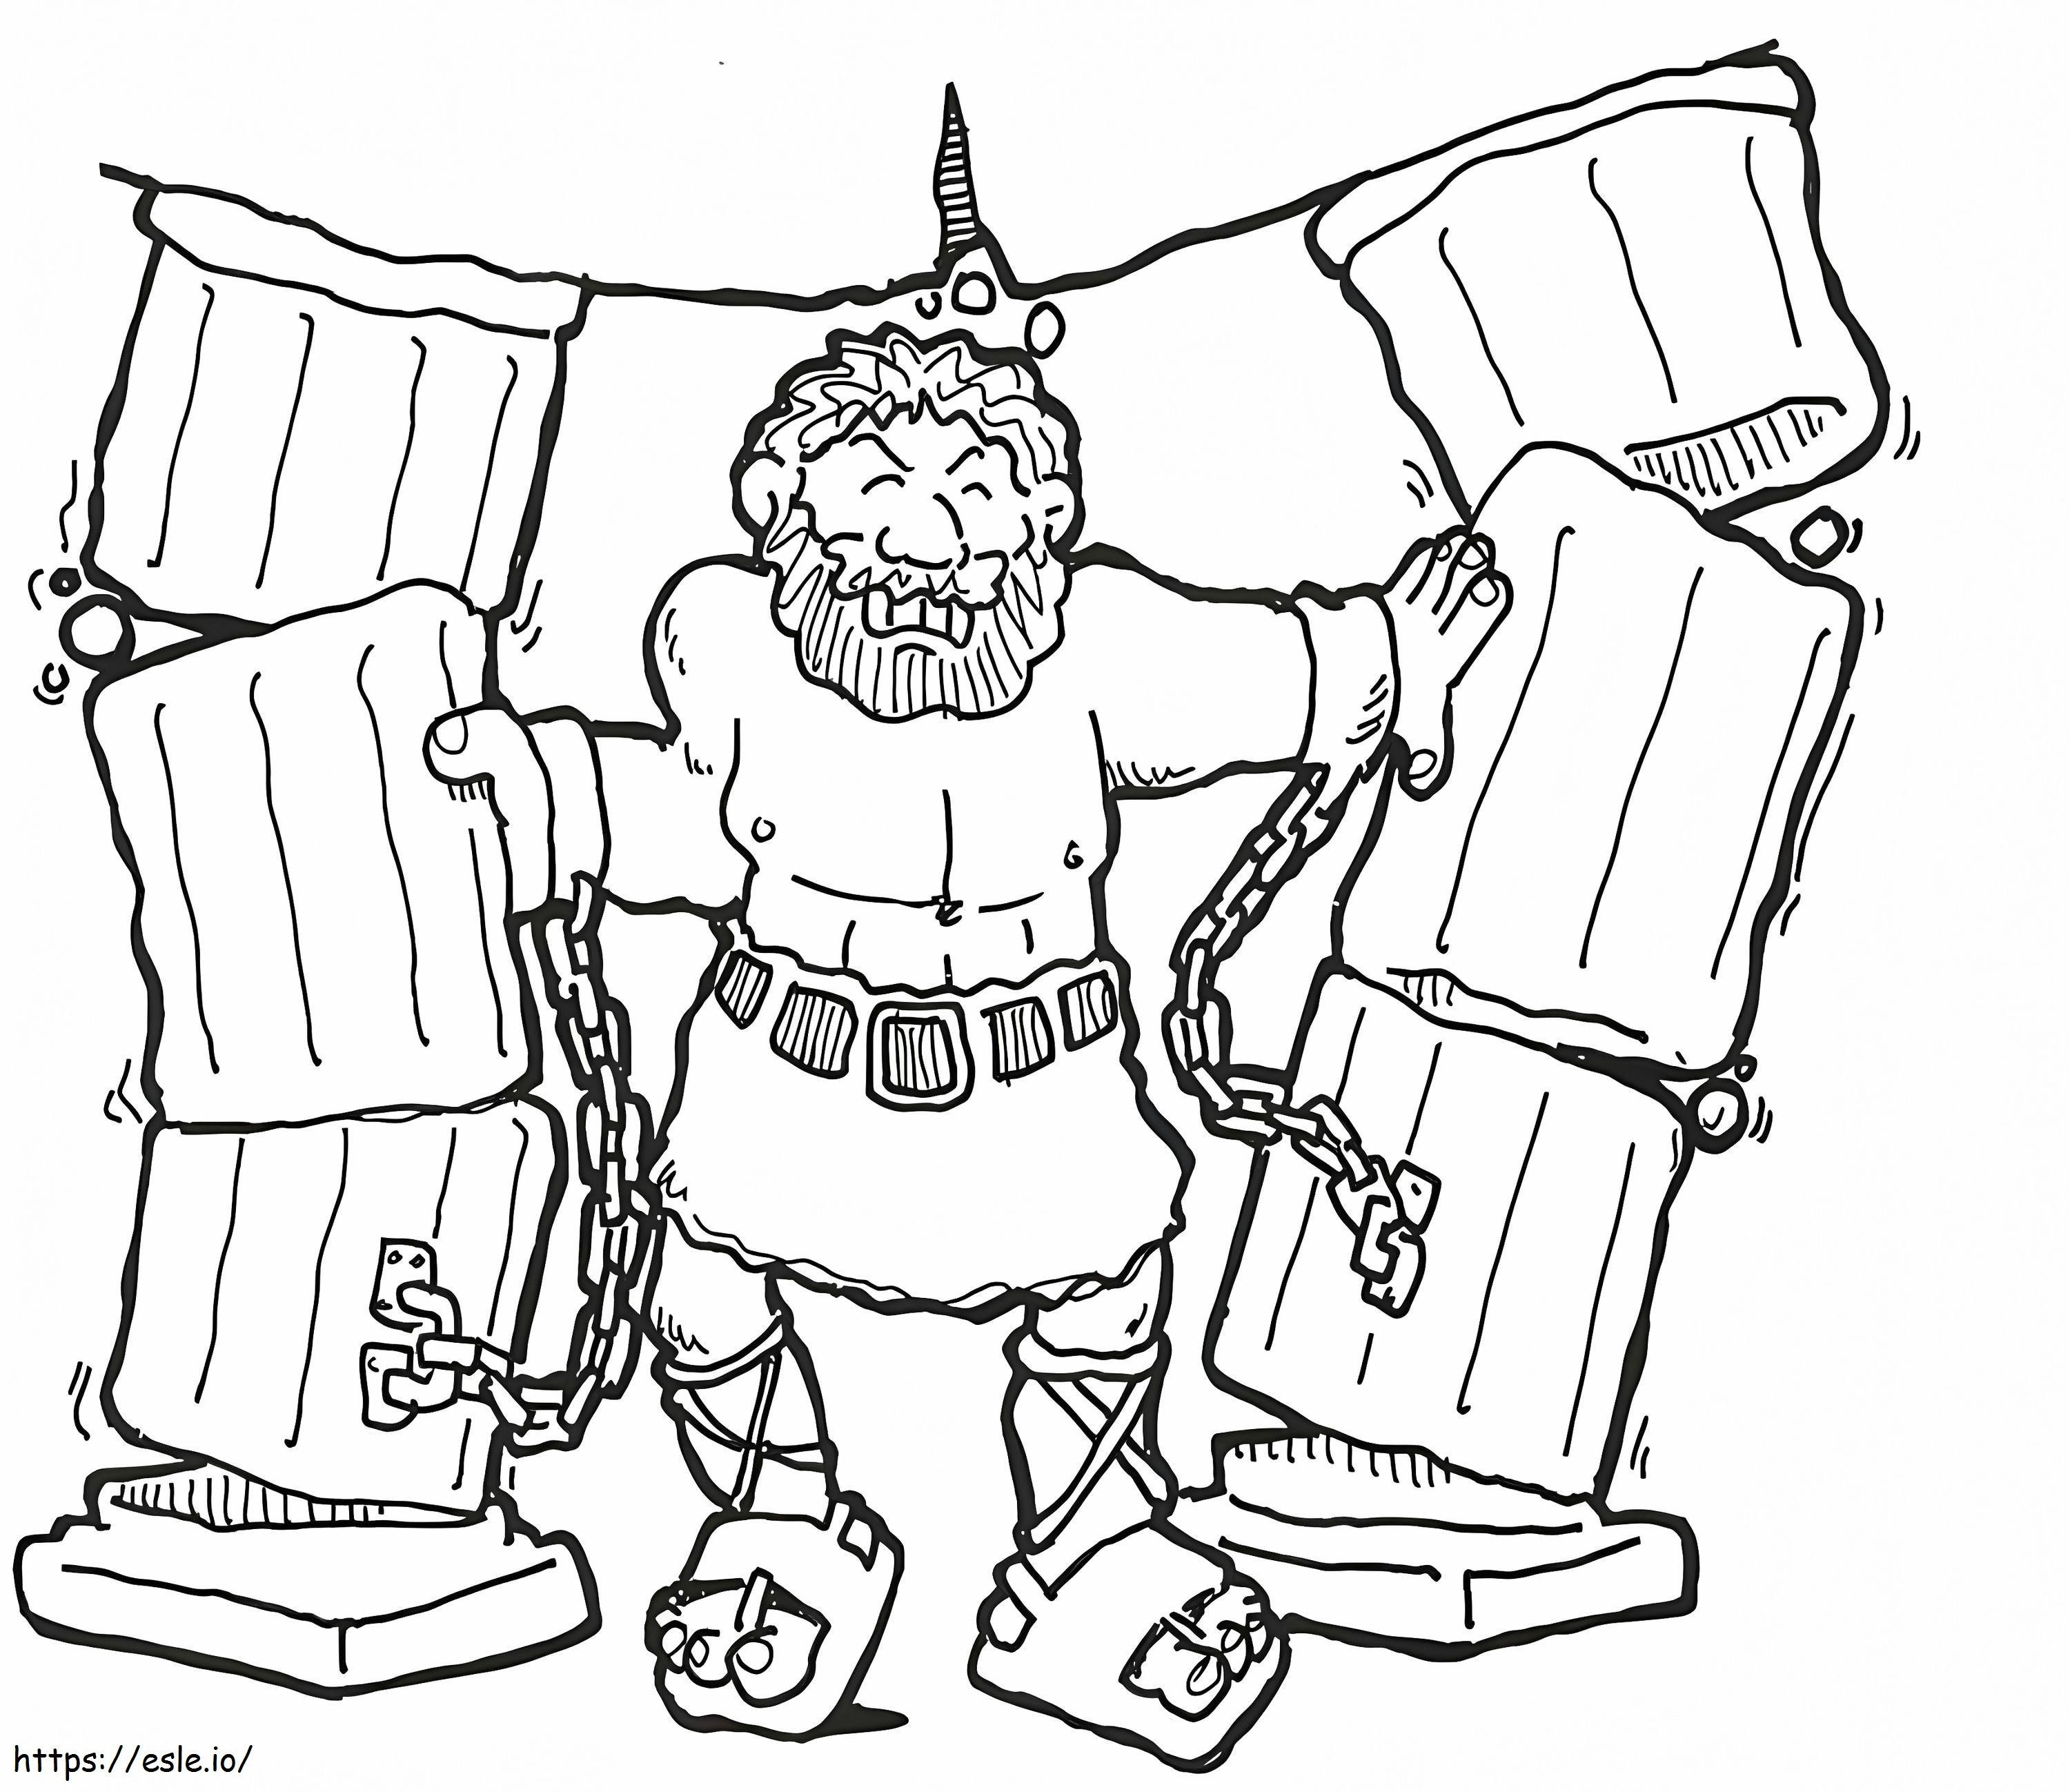 Sampsons Strength coloring page